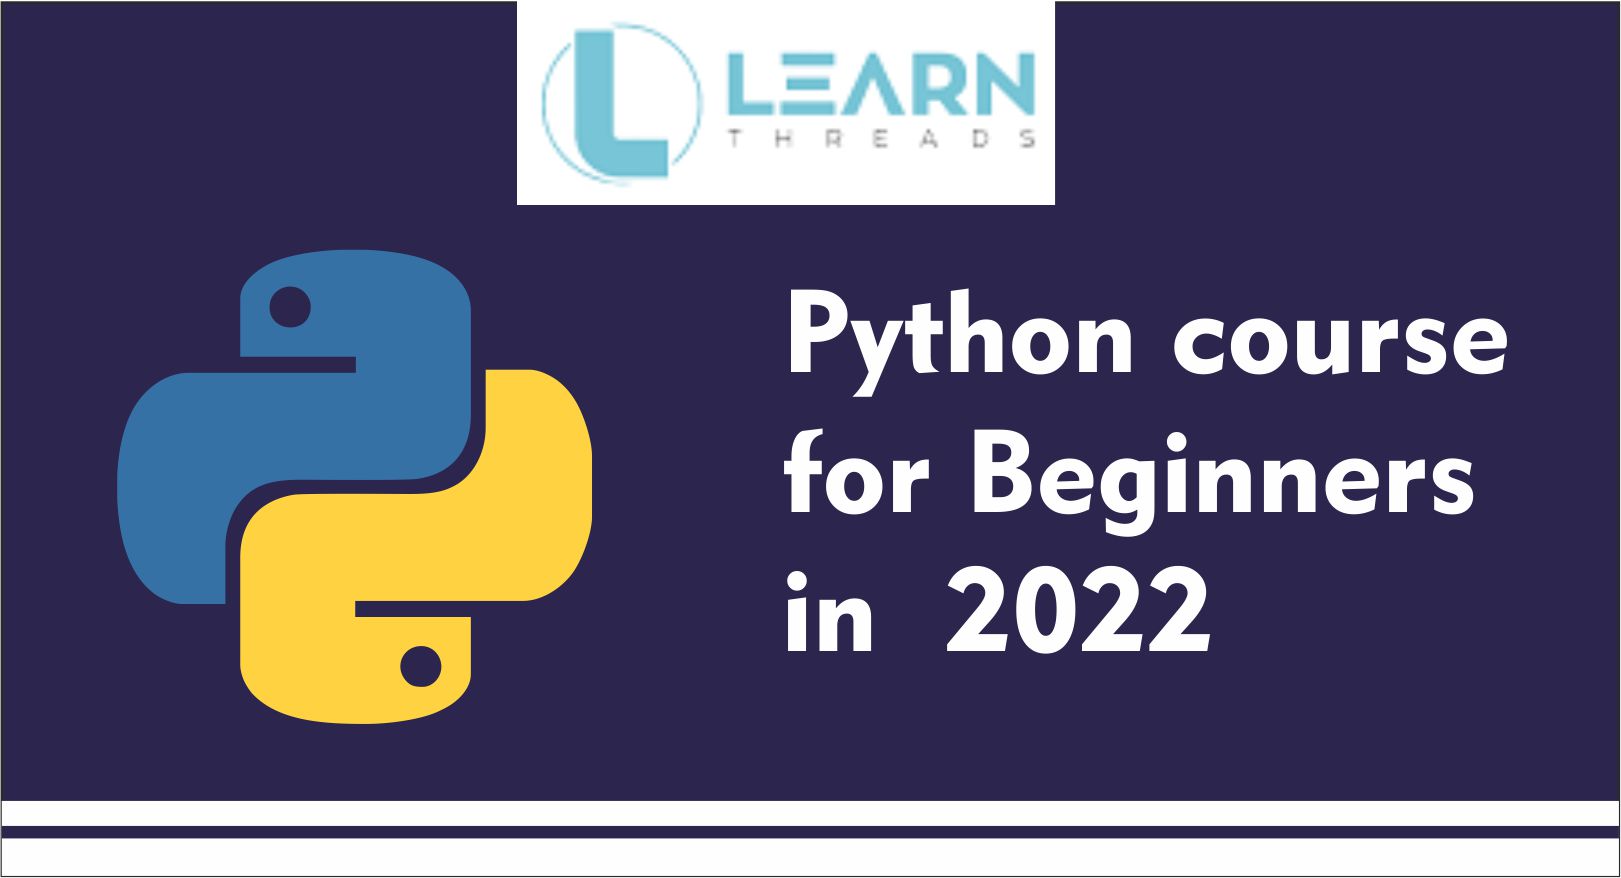 Python_course_for_Beginners_in__2022.jpg